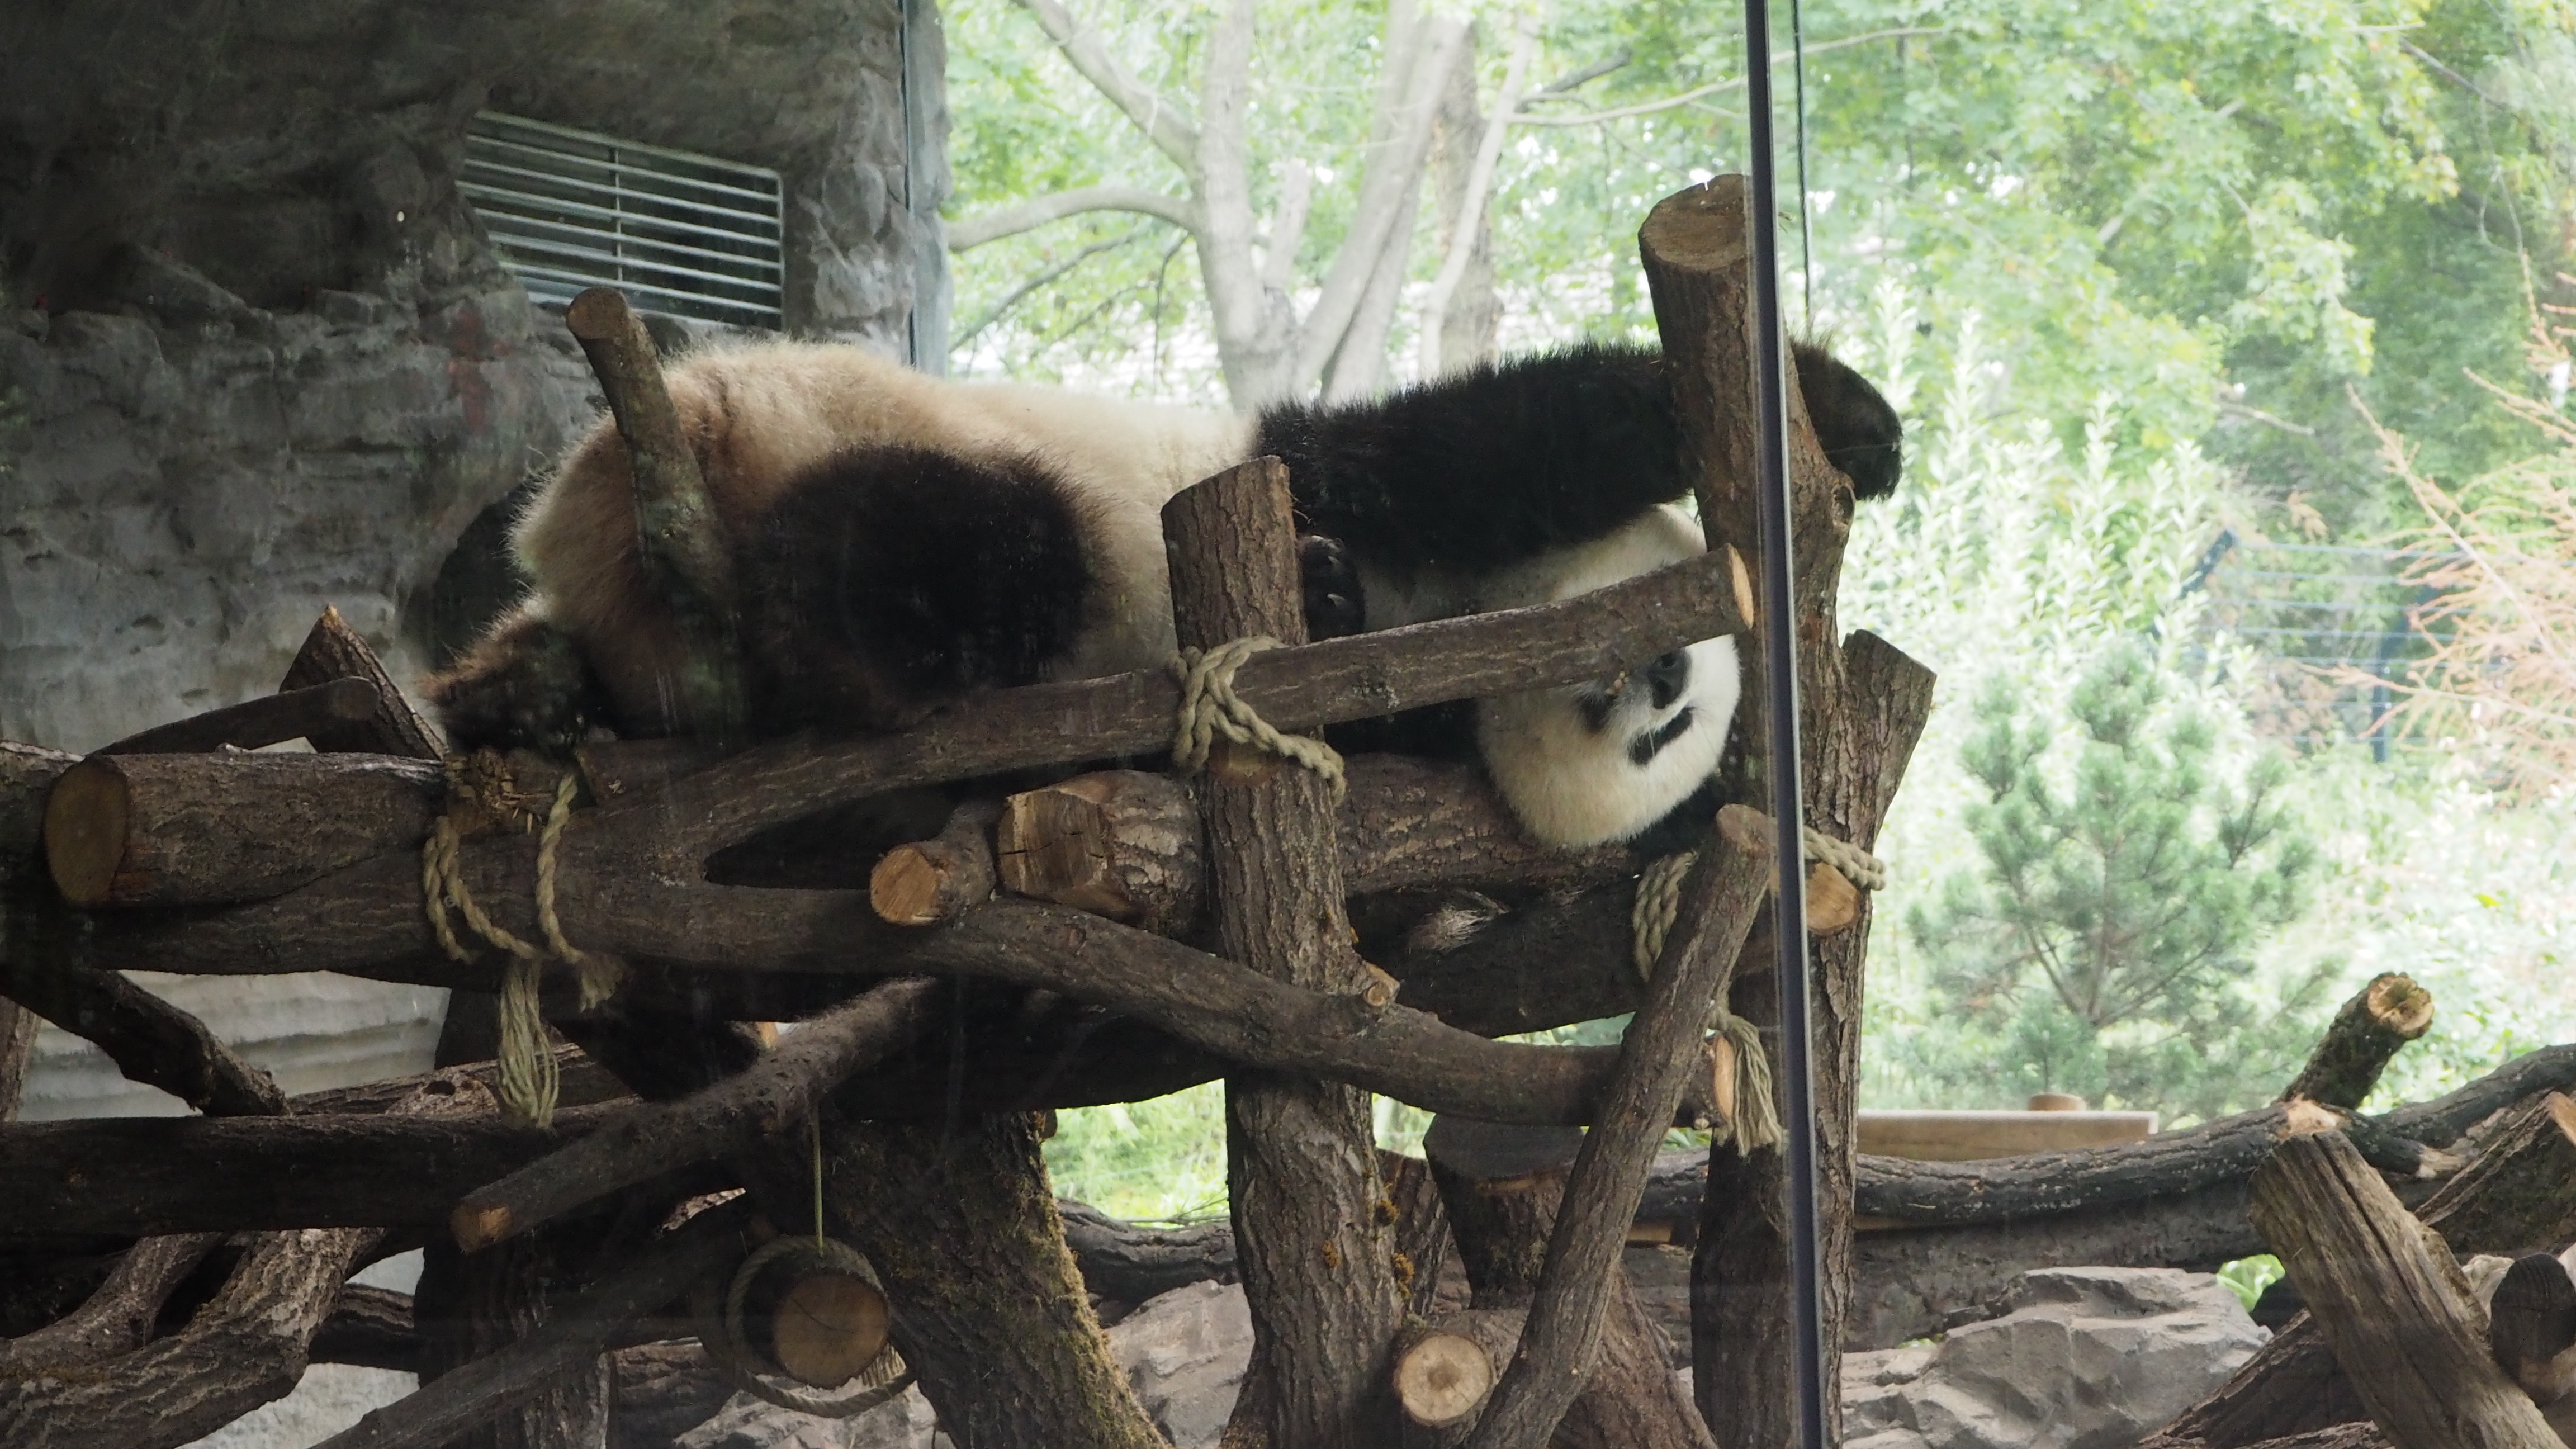 Panda laid on a wooden bed in an enclosure at Berlin Zoo